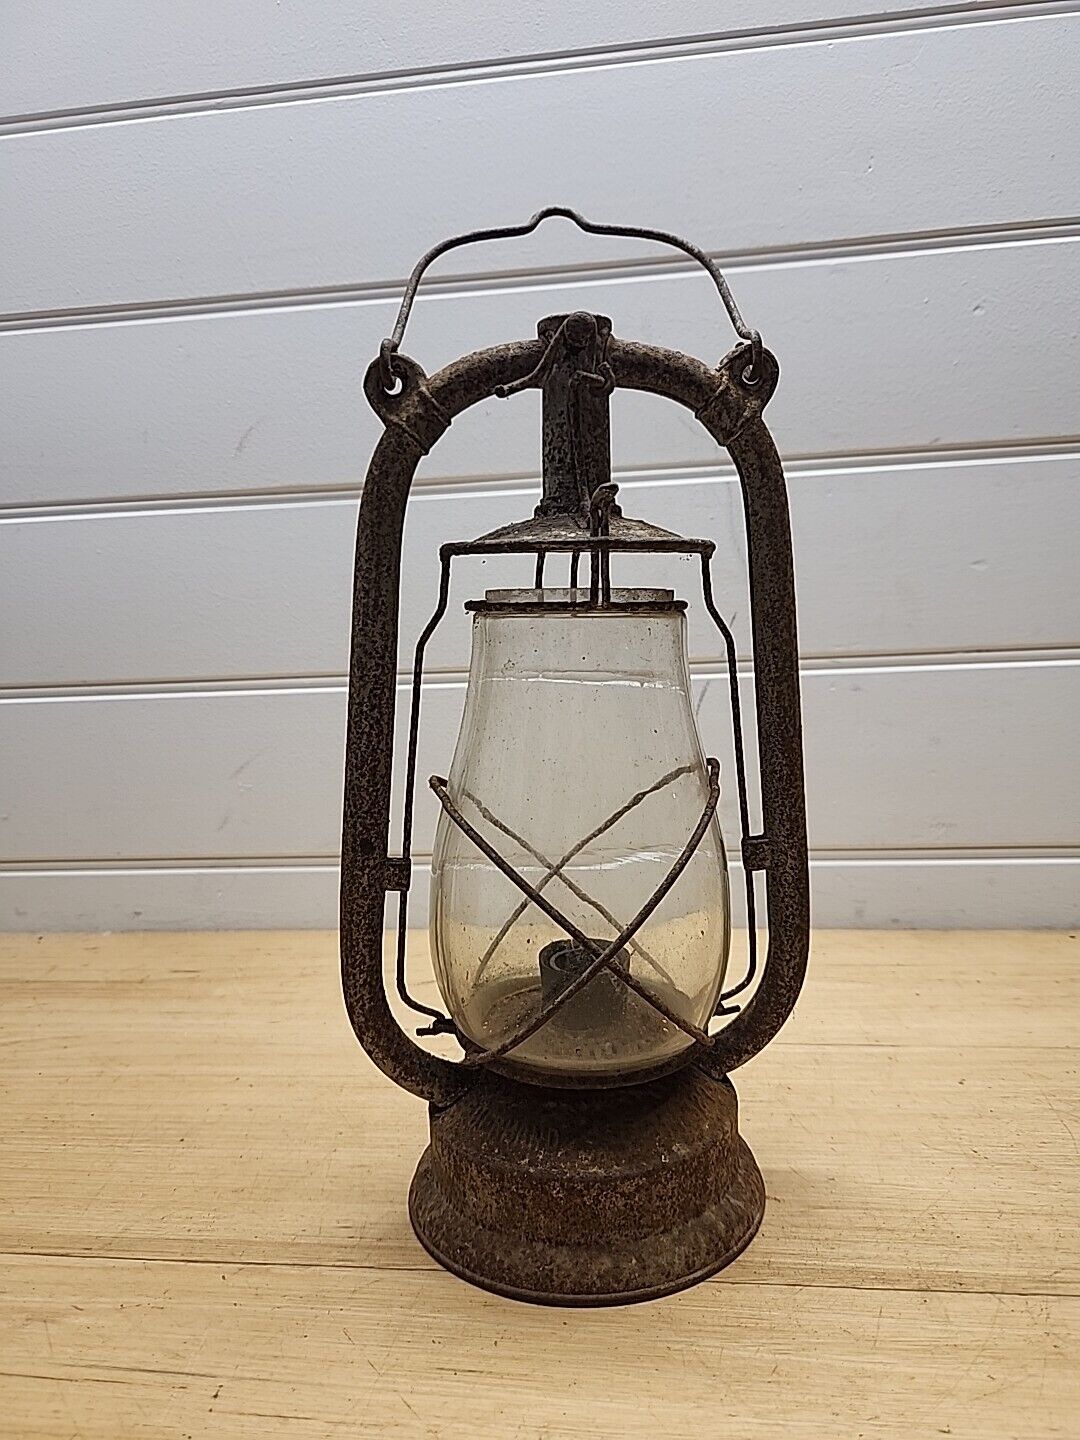 Vintage Feuerhand Hurricane Lamp NO 327 Made in Germany